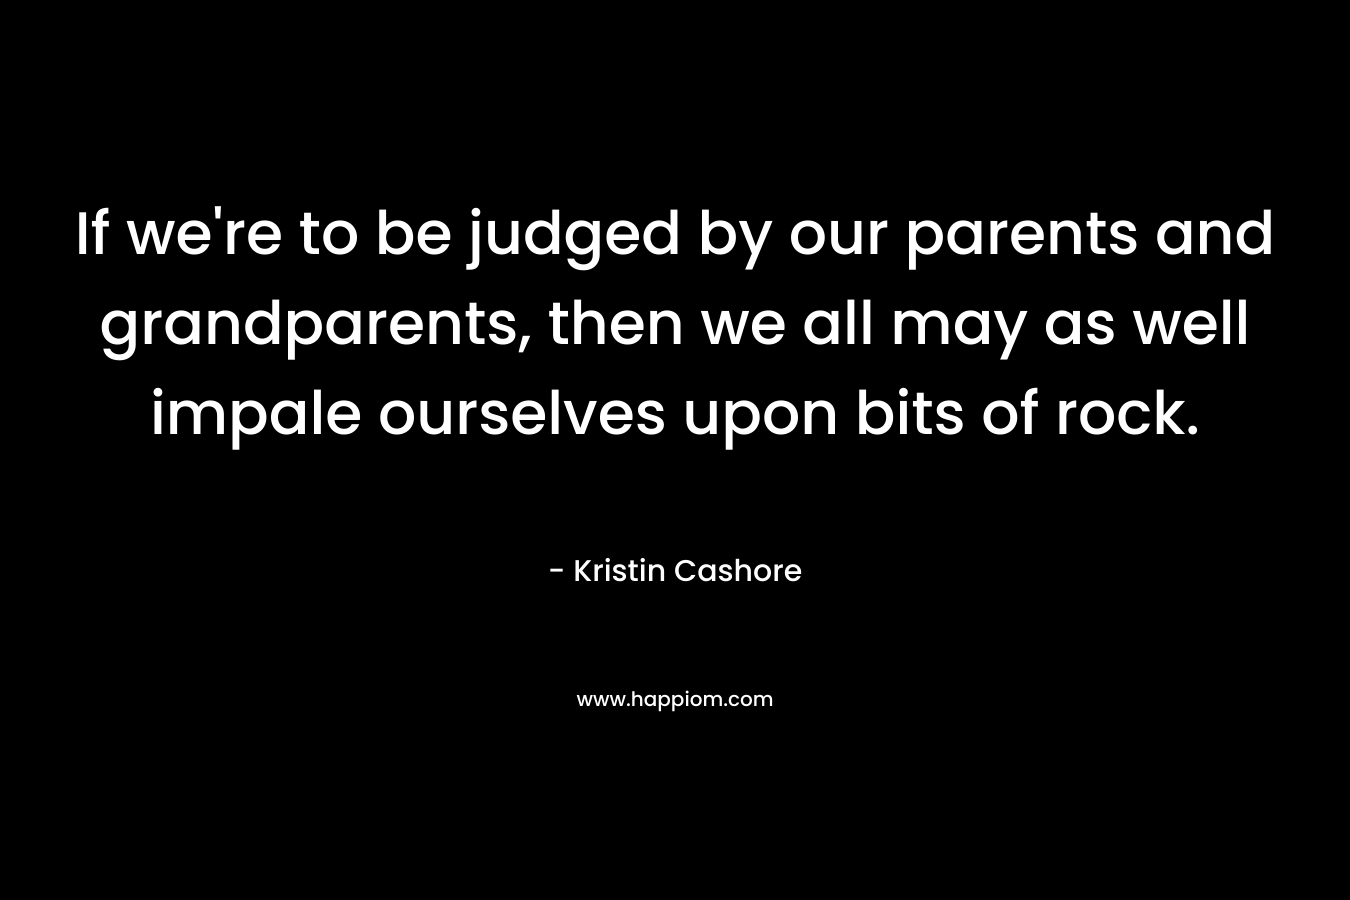 If we’re to be judged by our parents and grandparents, then we all may as well impale ourselves upon bits of rock. – Kristin Cashore